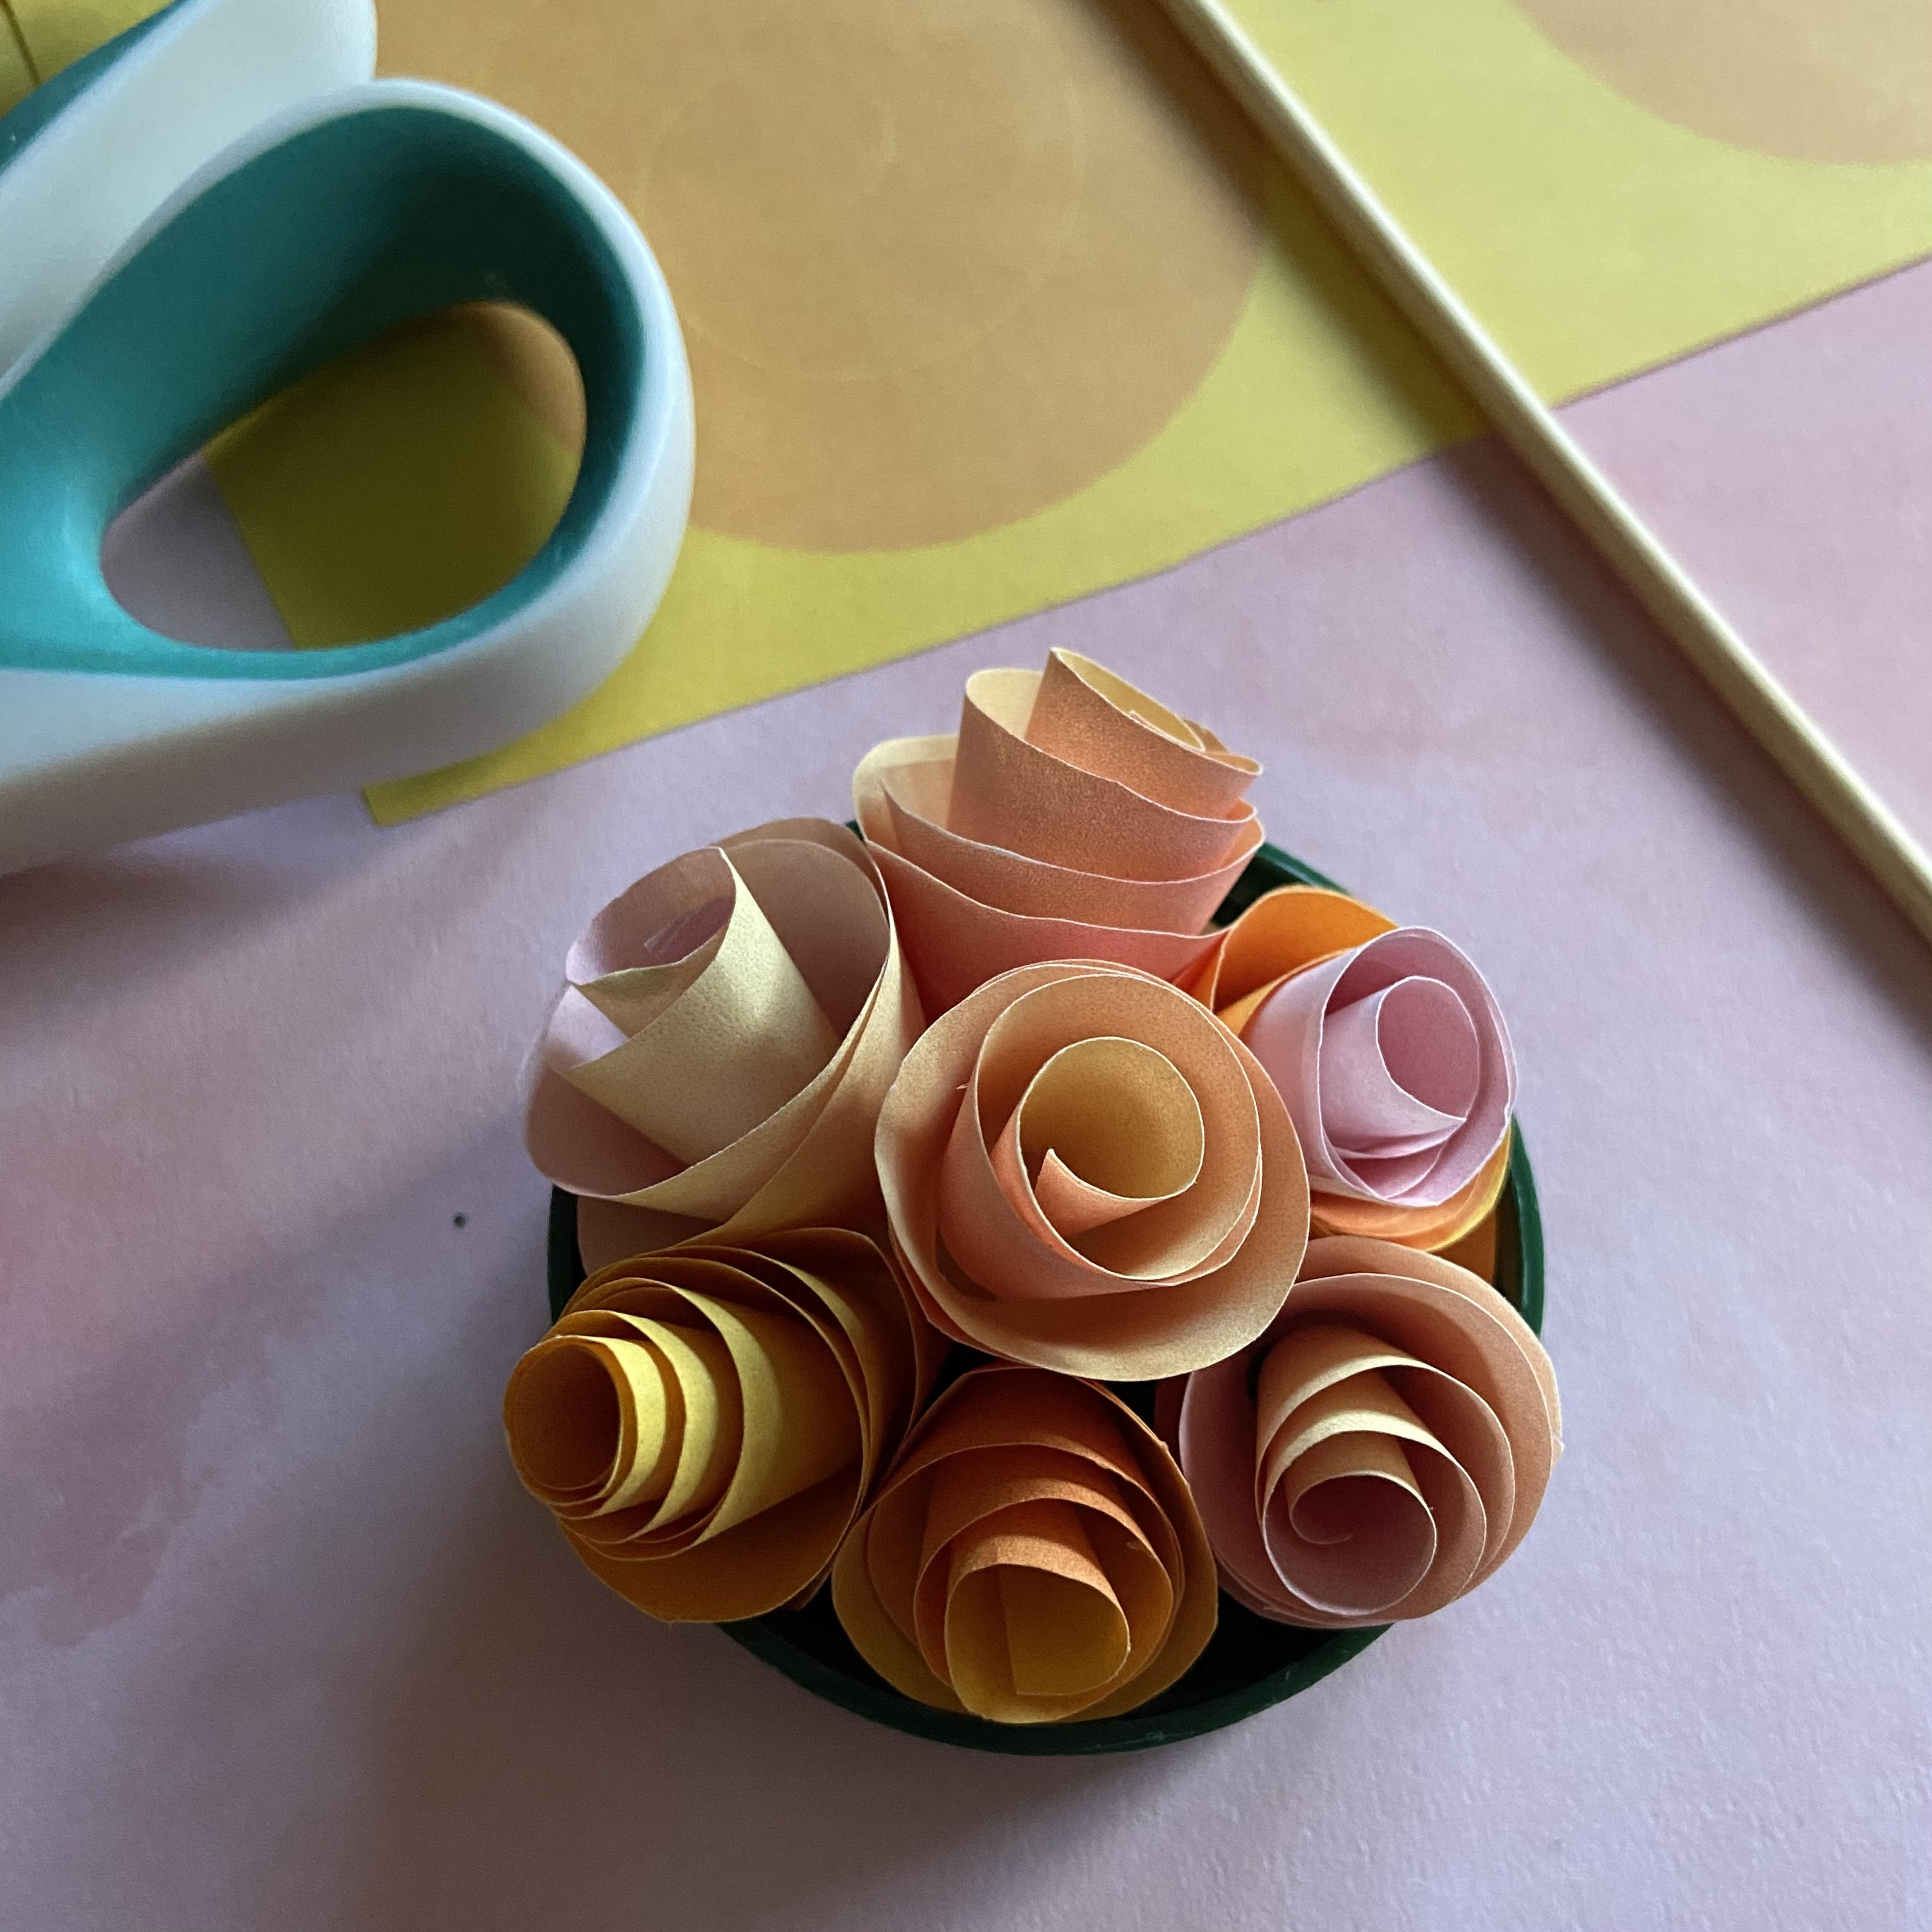 Easy Rose Bouquet Craft